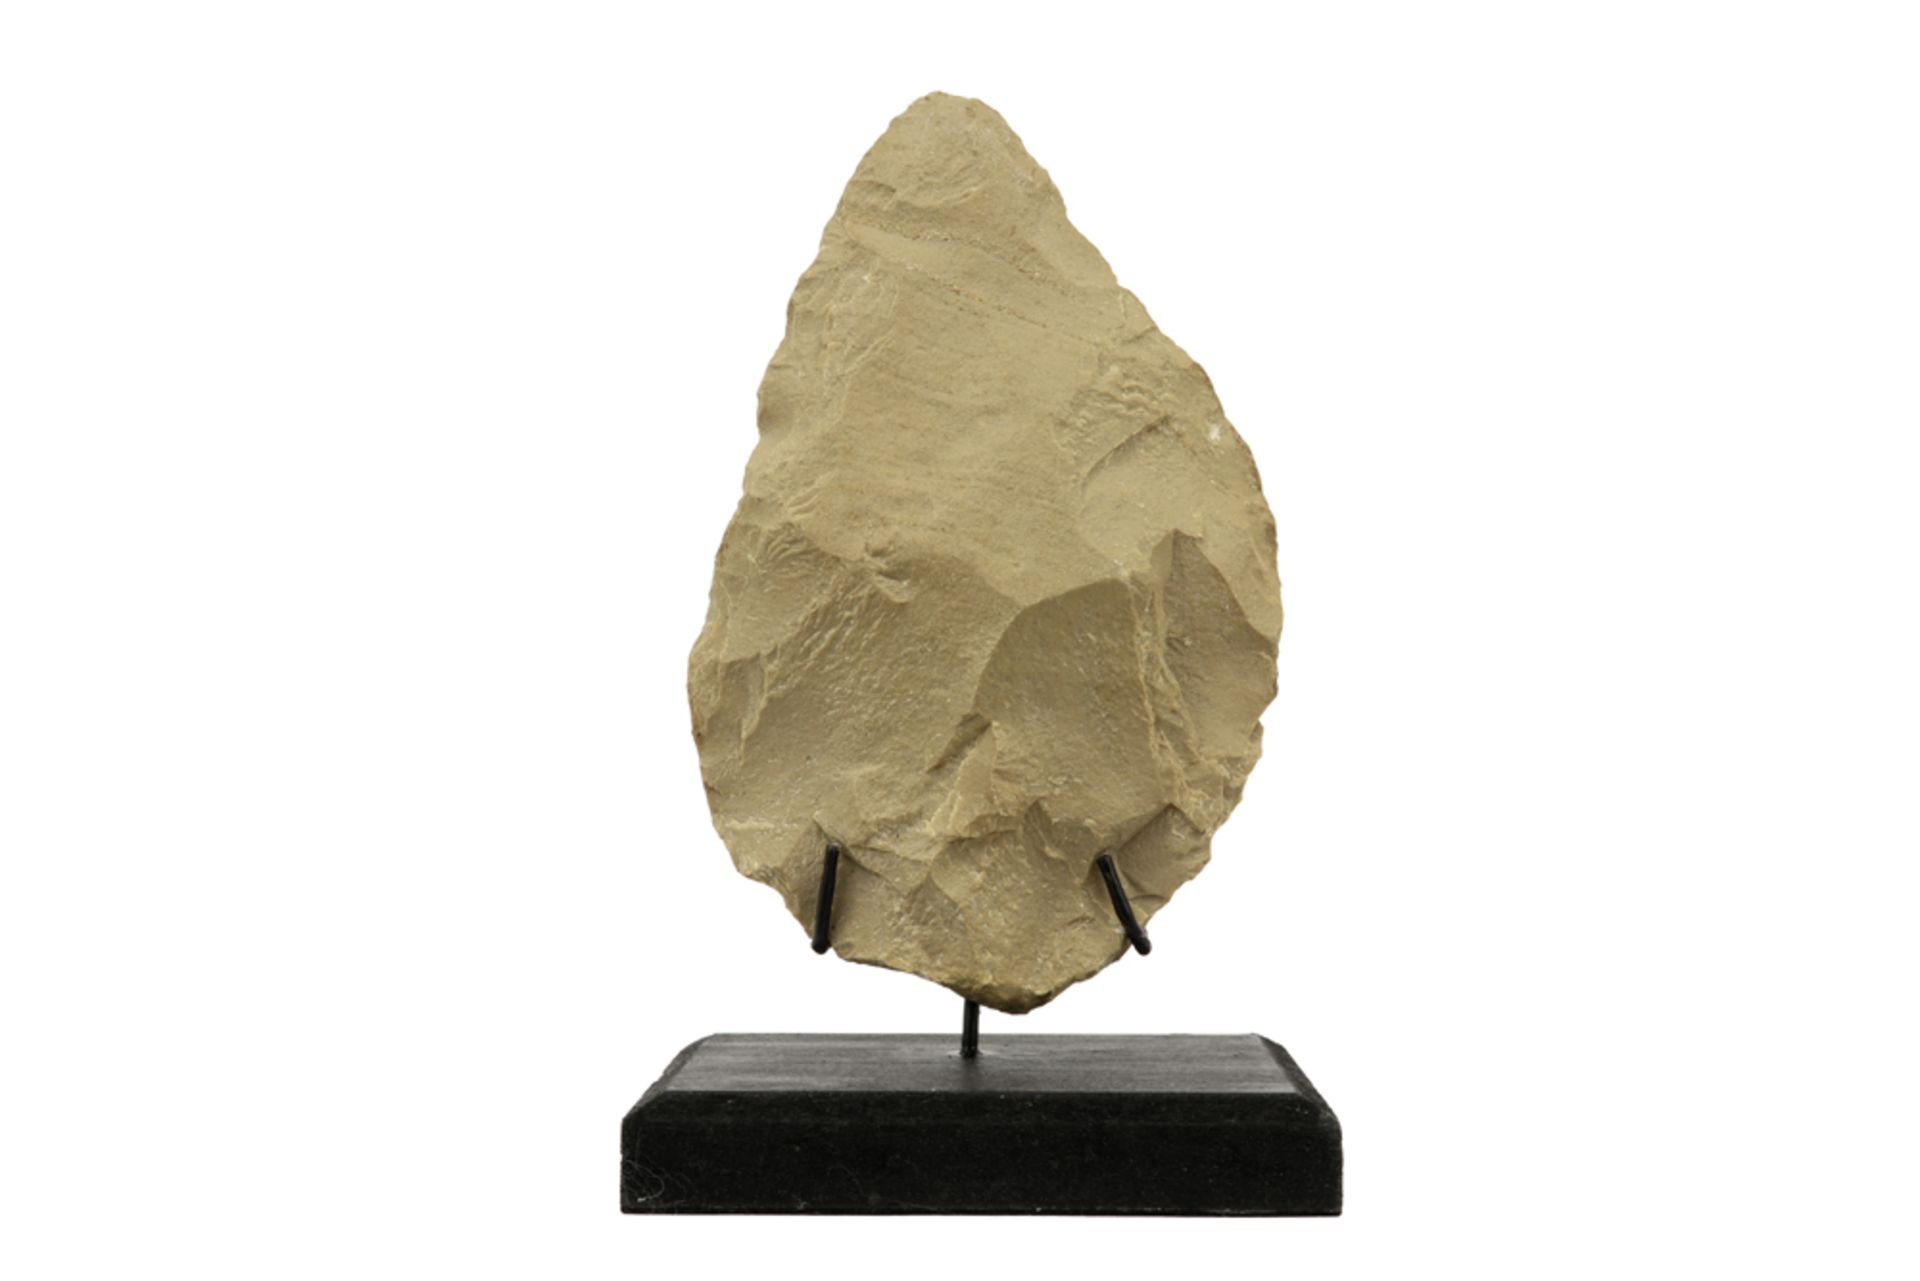 Archaeology from the Early Paleothic Age : rare two-sided stone hand ax dating between 300000 and